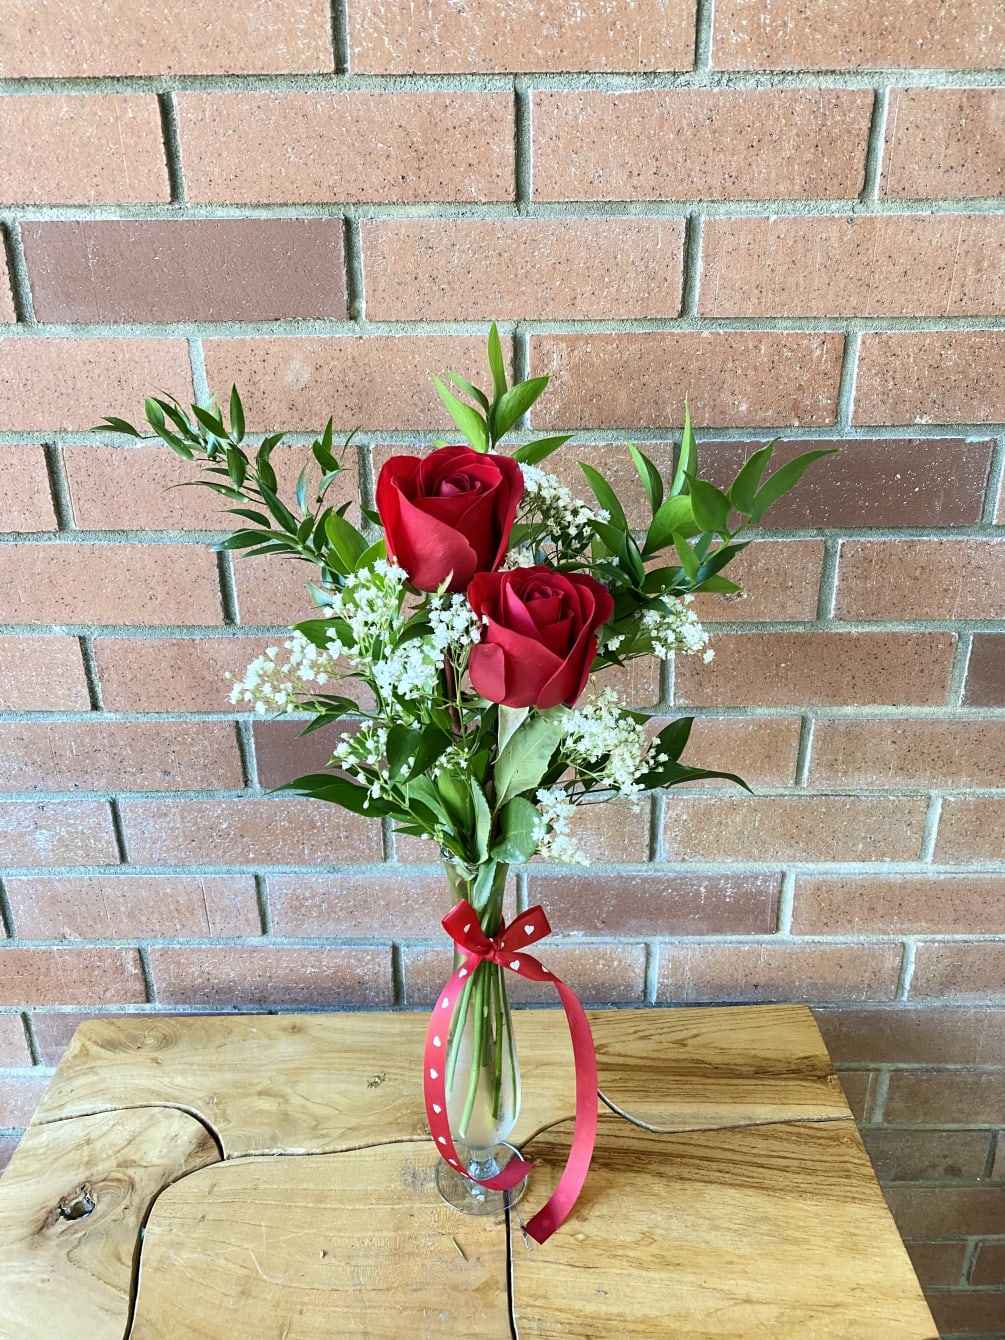 A sweet and simply elegant bud vase with 2 beautiful red roses
Deluxe-